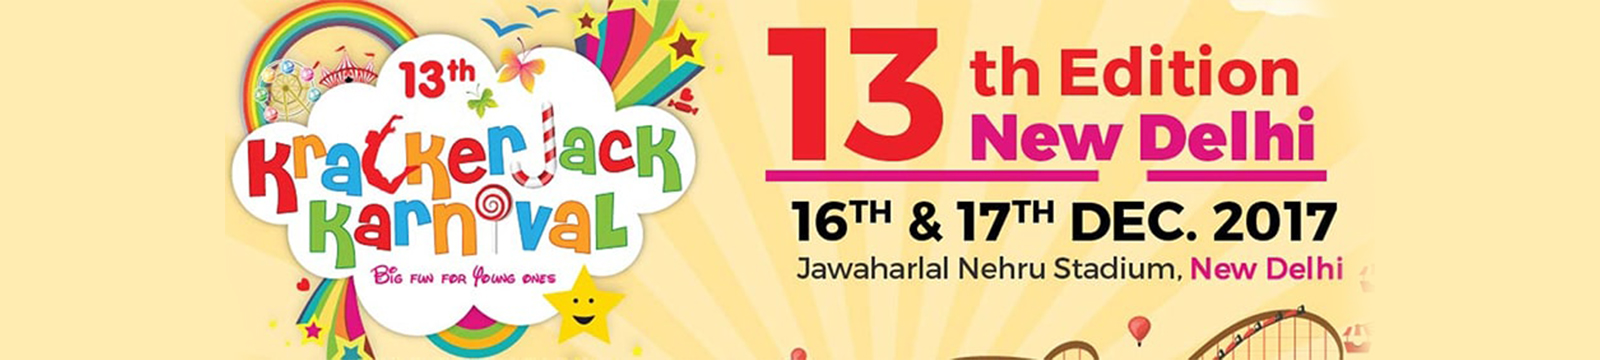 Shop, Play and Learn at India’s Largest Event dedicated to Kids!